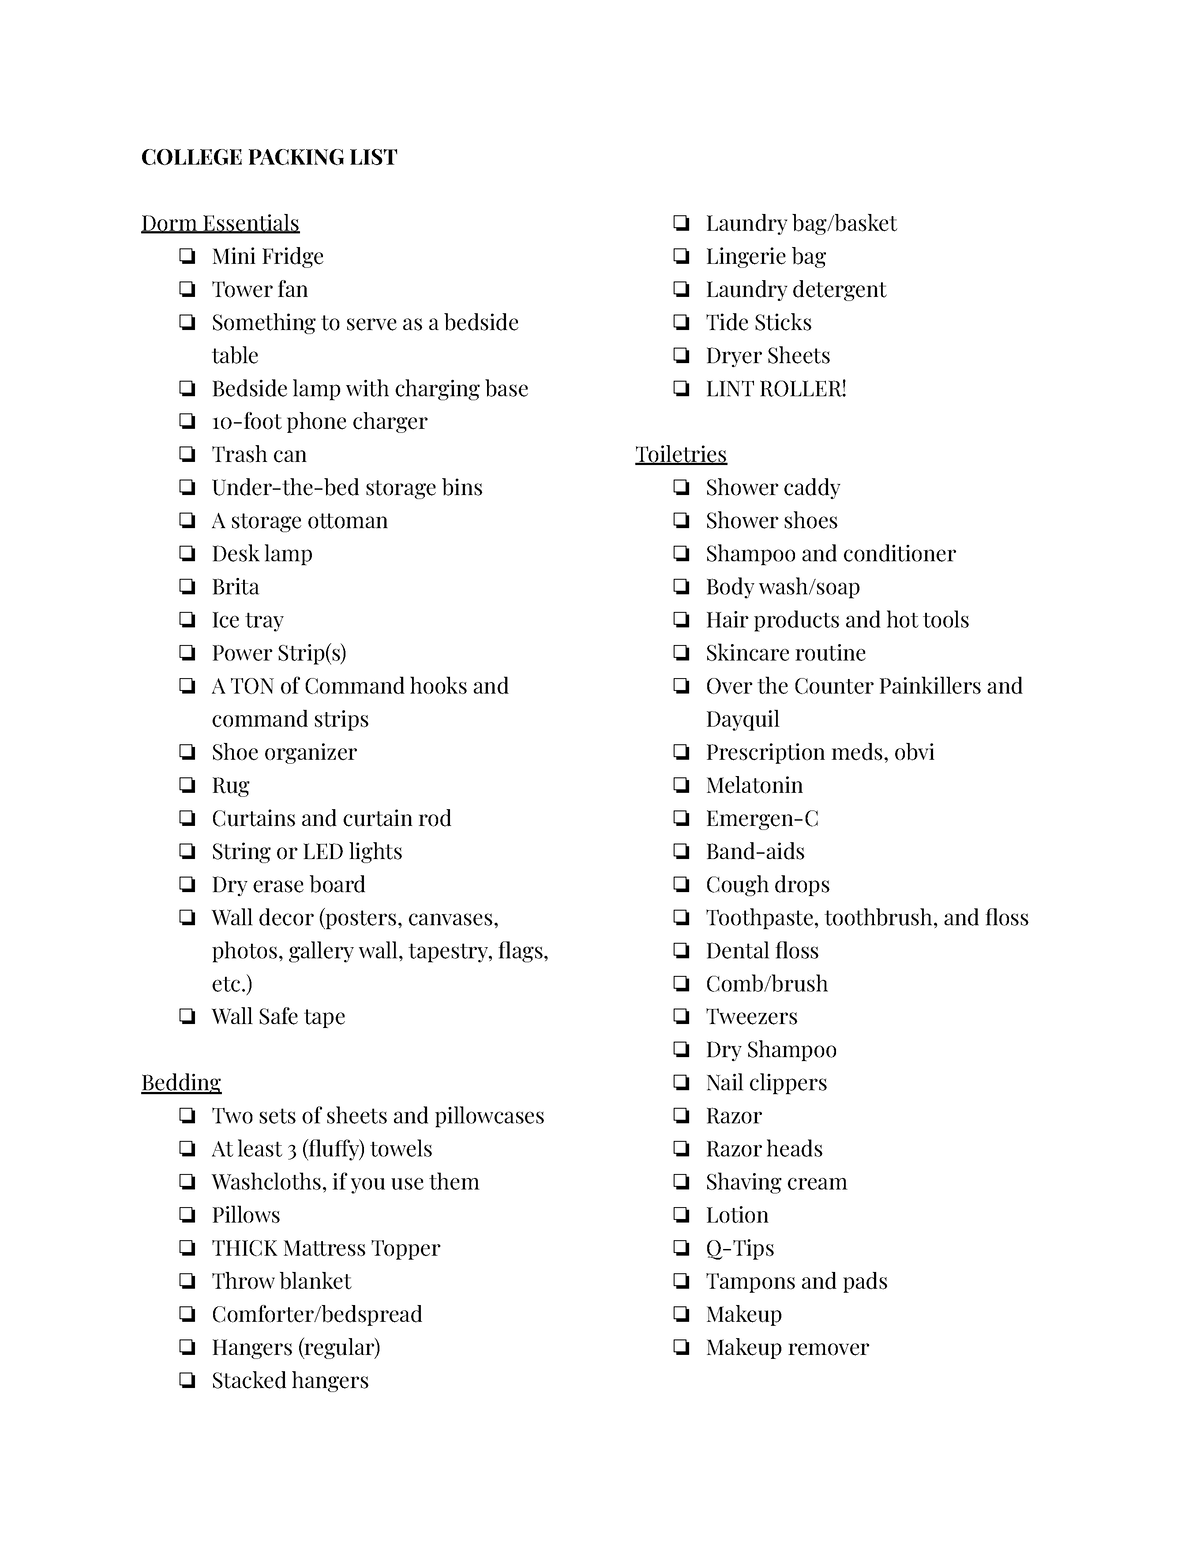 Sophie's Printable College Packing List - COLLEGE PACKING LIST Dorm ...